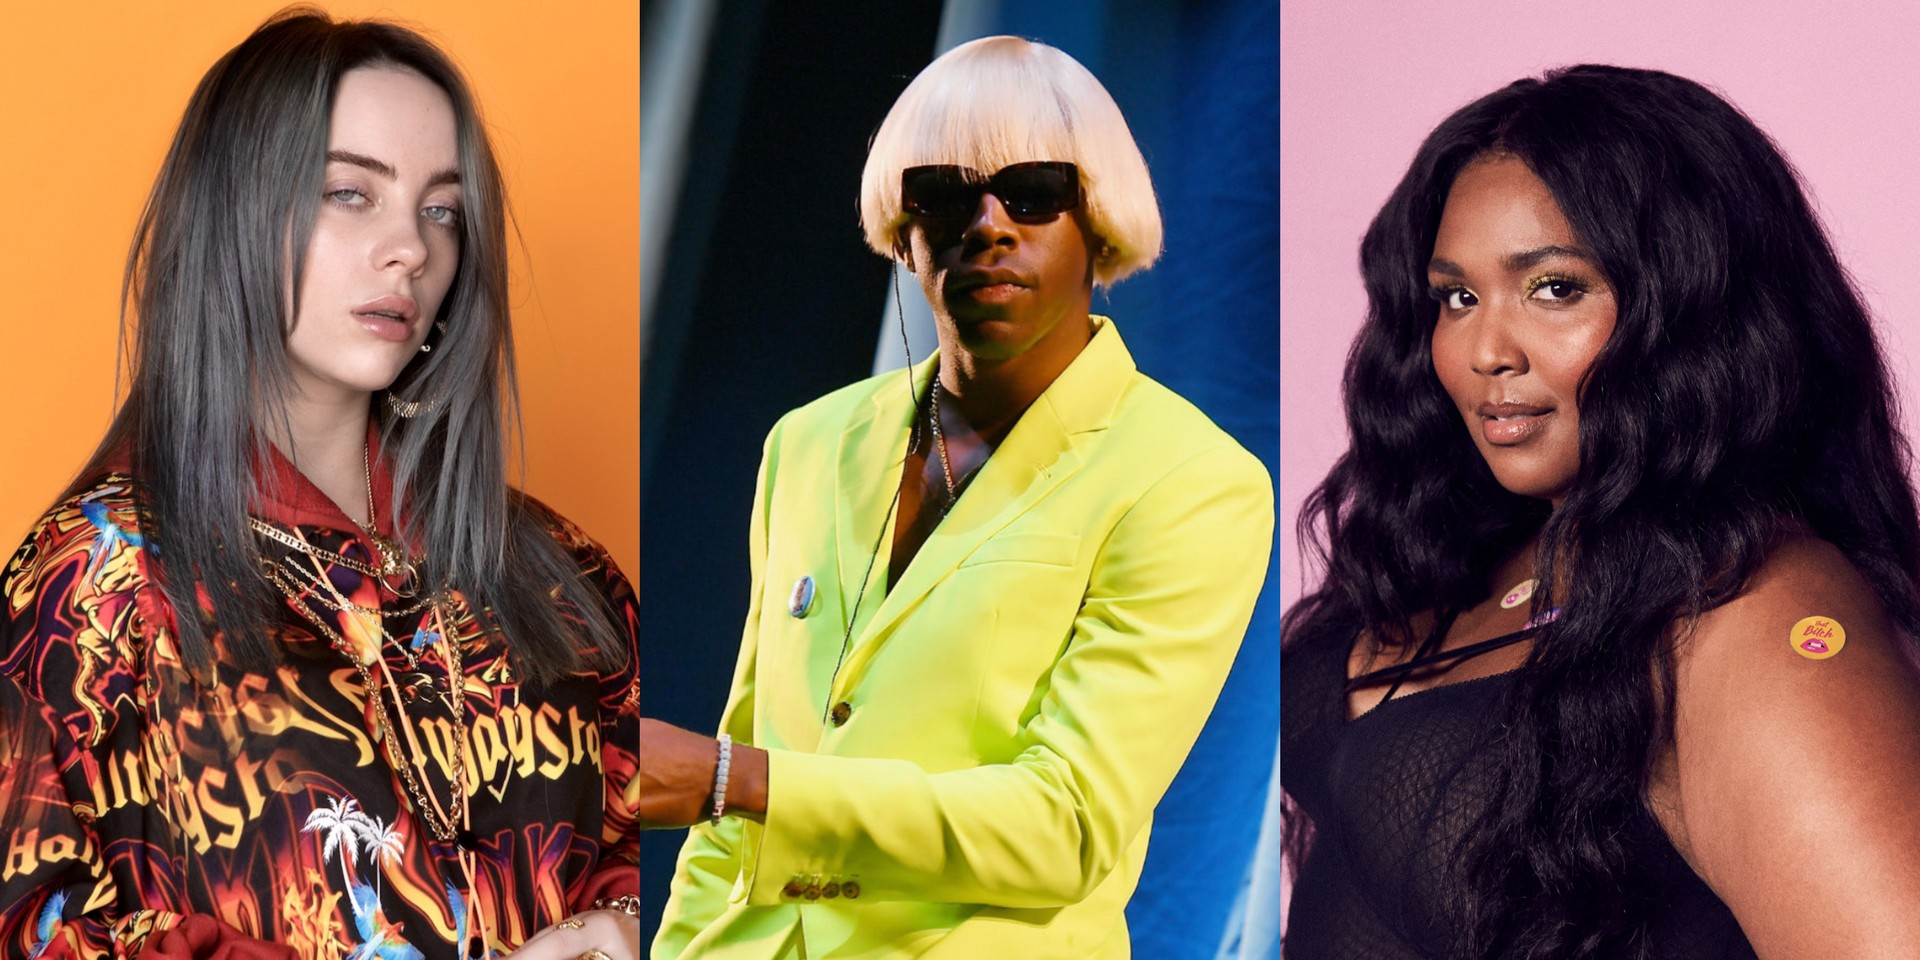 Here are the nominations for the 2020 Grammy Awards